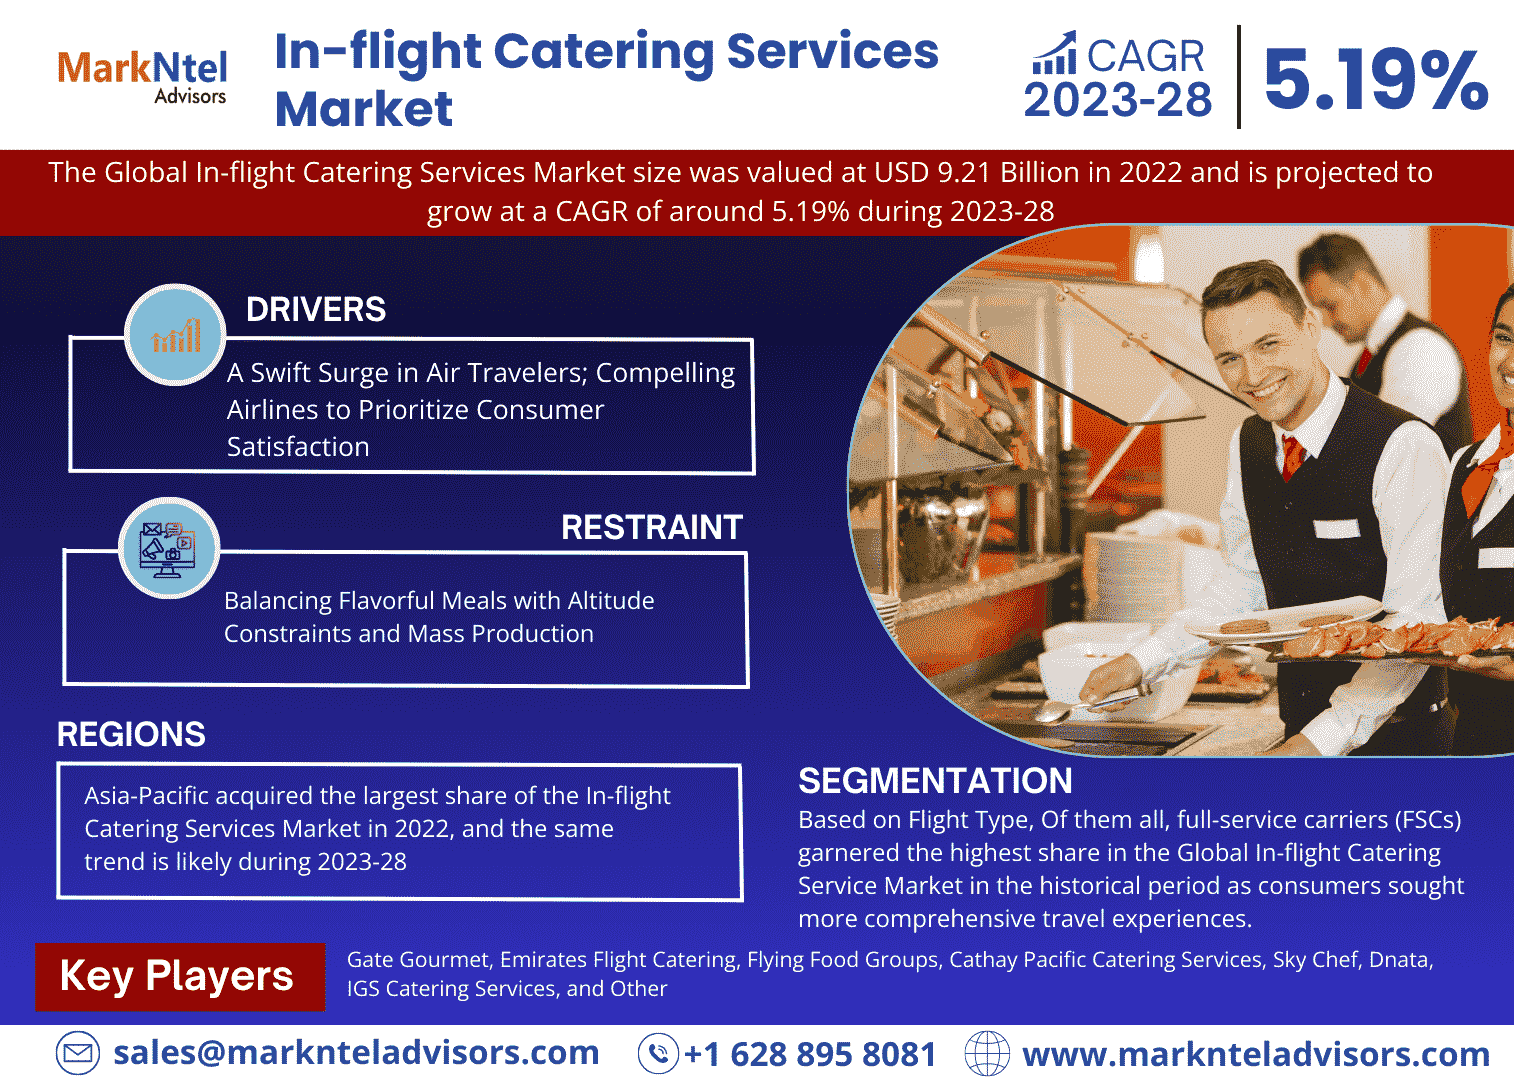 Global In-flight Catering Services Market